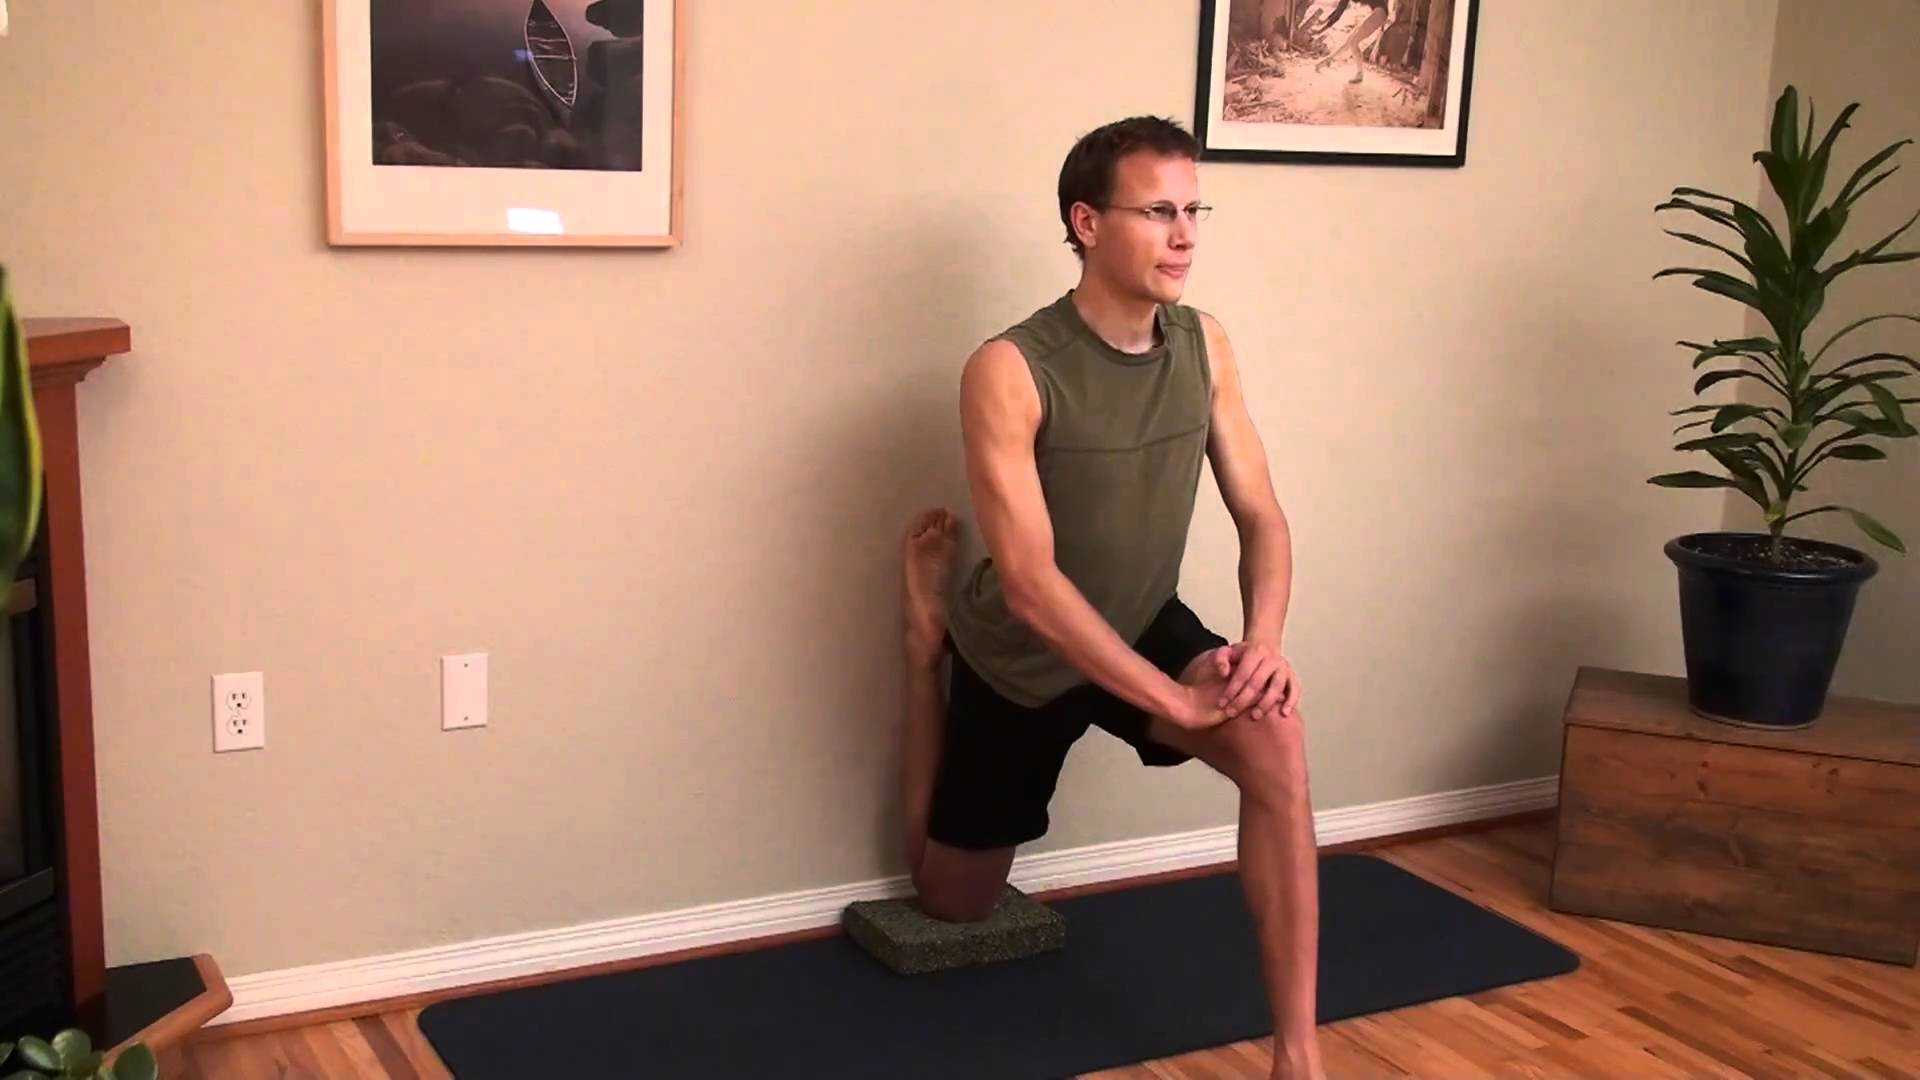 Yoga Poses at work against the wall